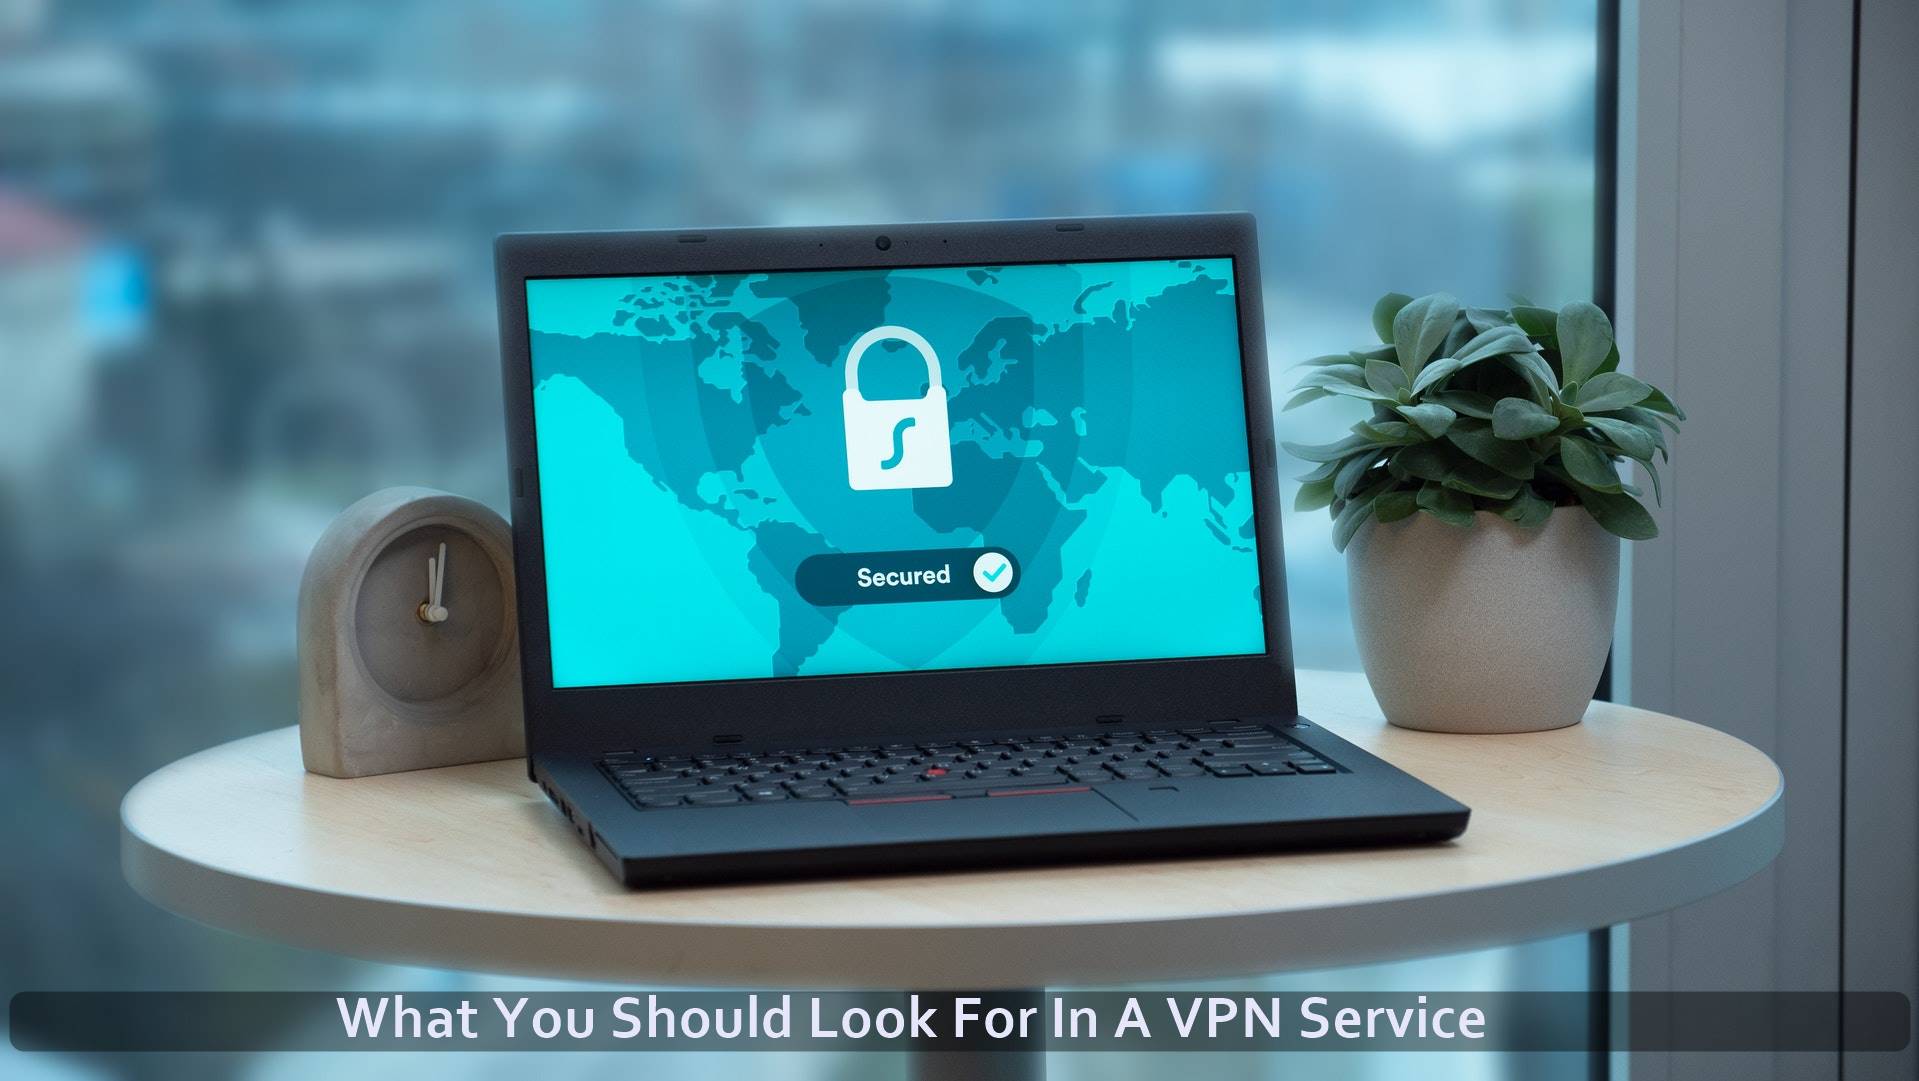 What You Should Look For In A VPN Service